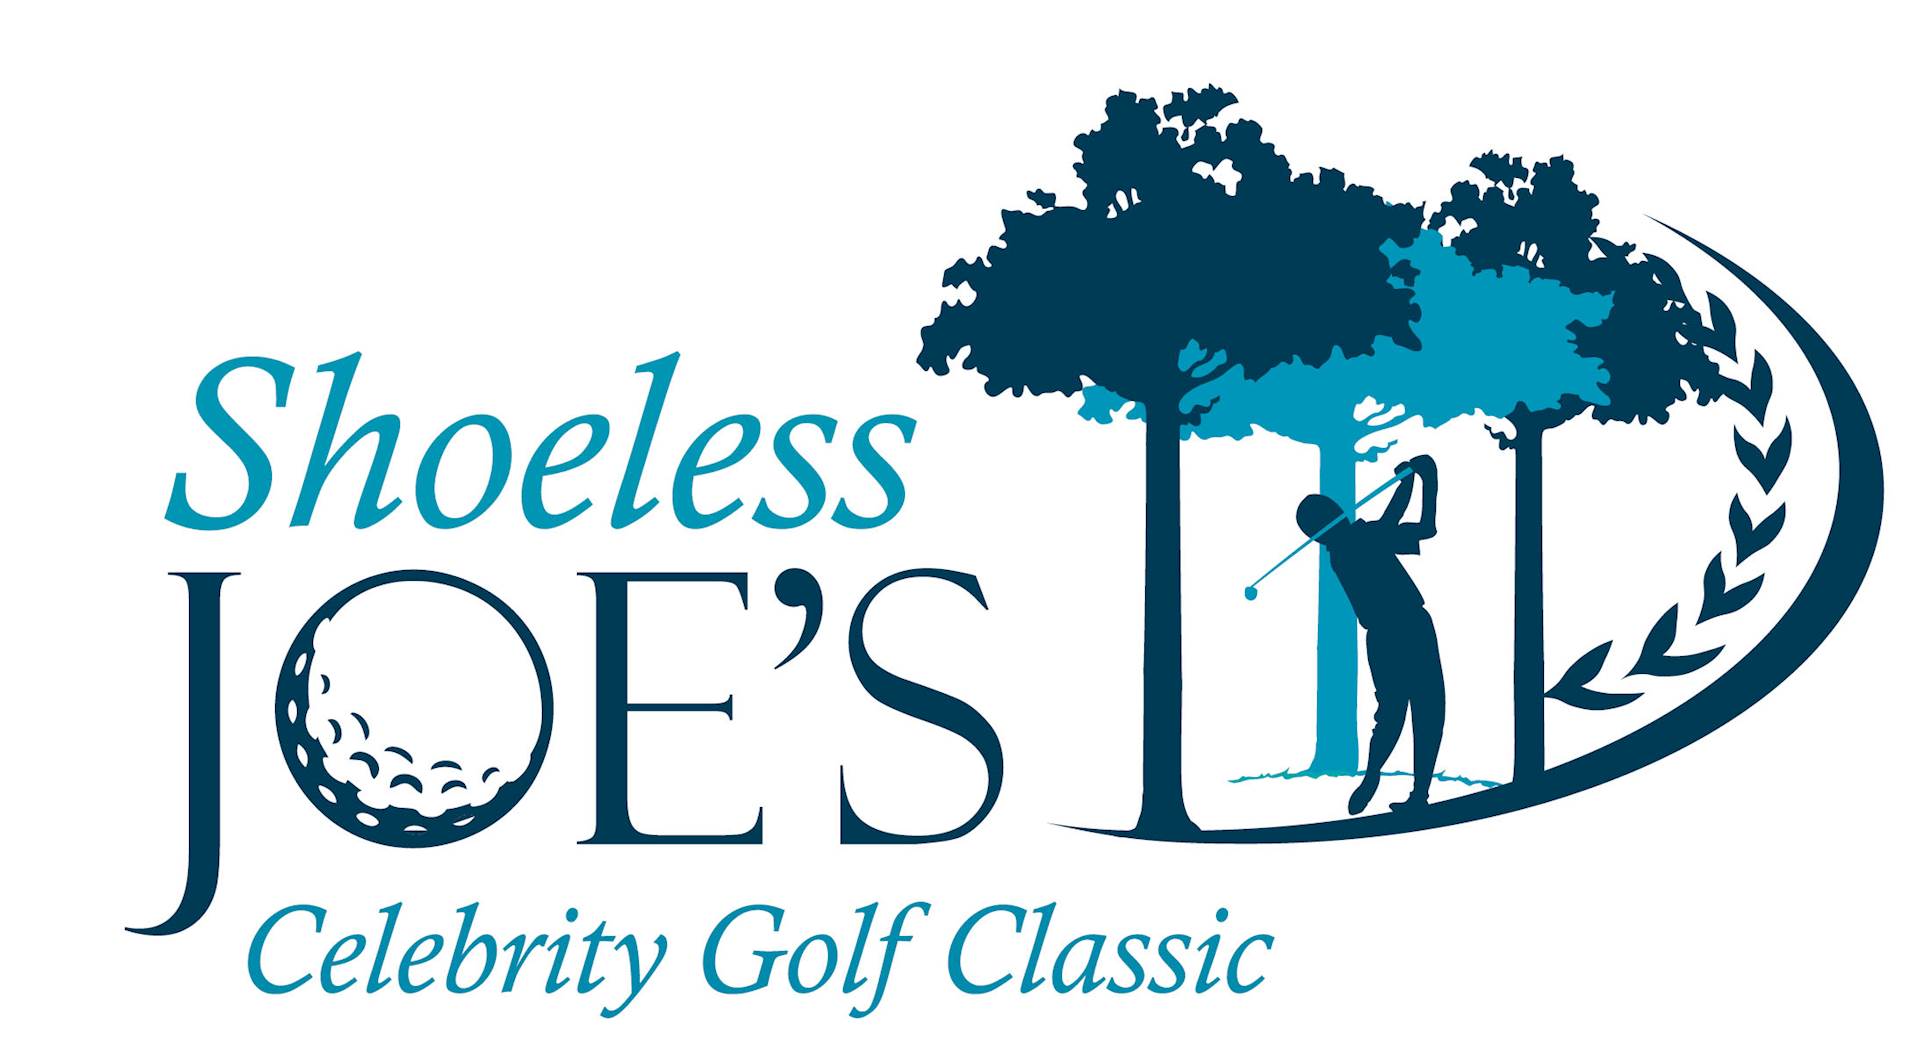 Check more about Shoeless Joe’s Celebrity Golf Classic